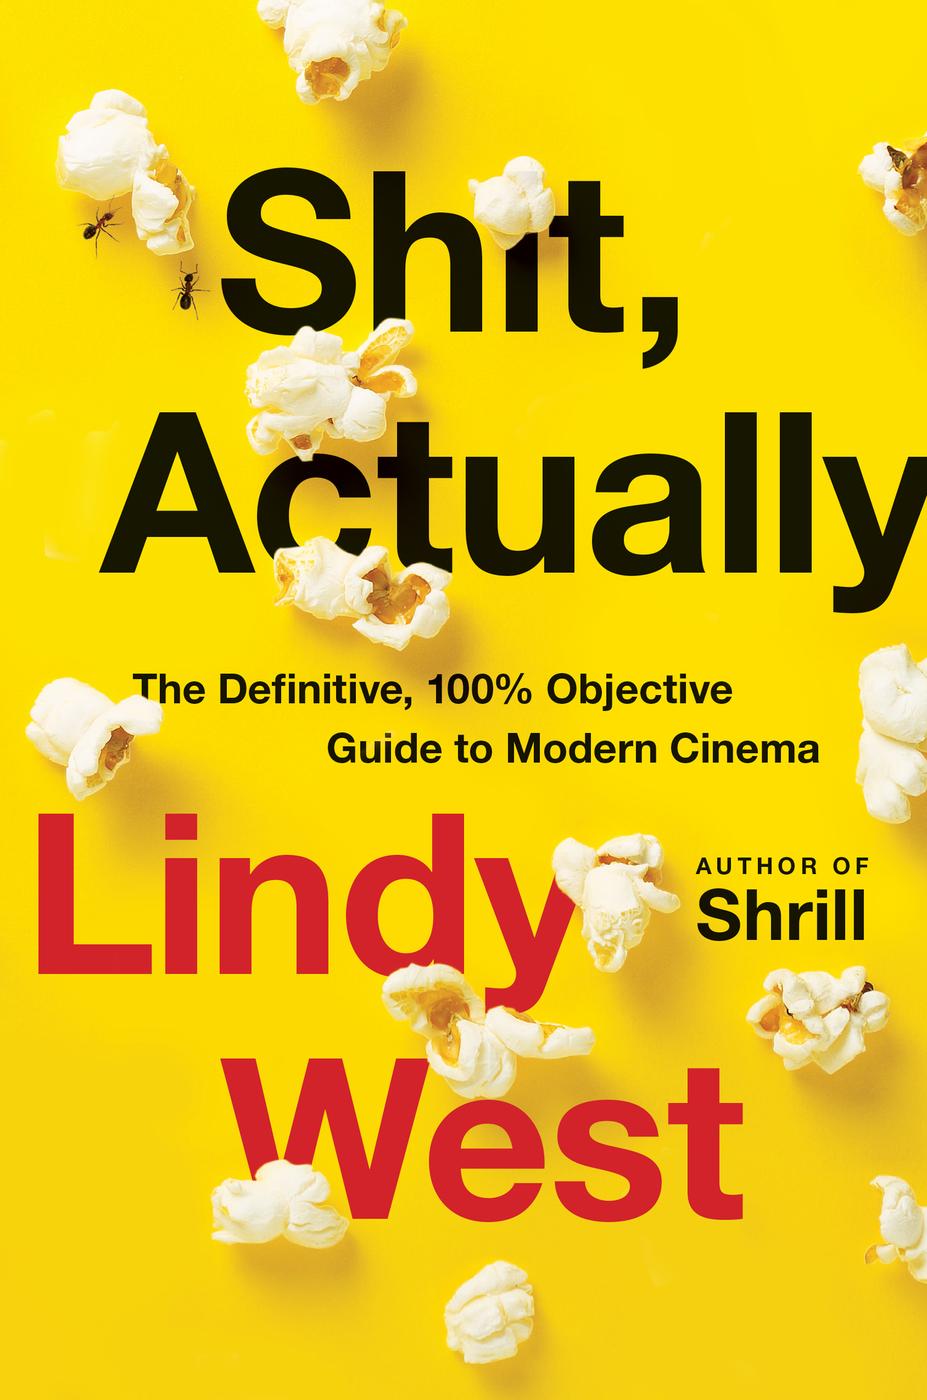 Copyright 2020 by Lindy West Cover design by Amanda Kain Cover photograph - photo 1